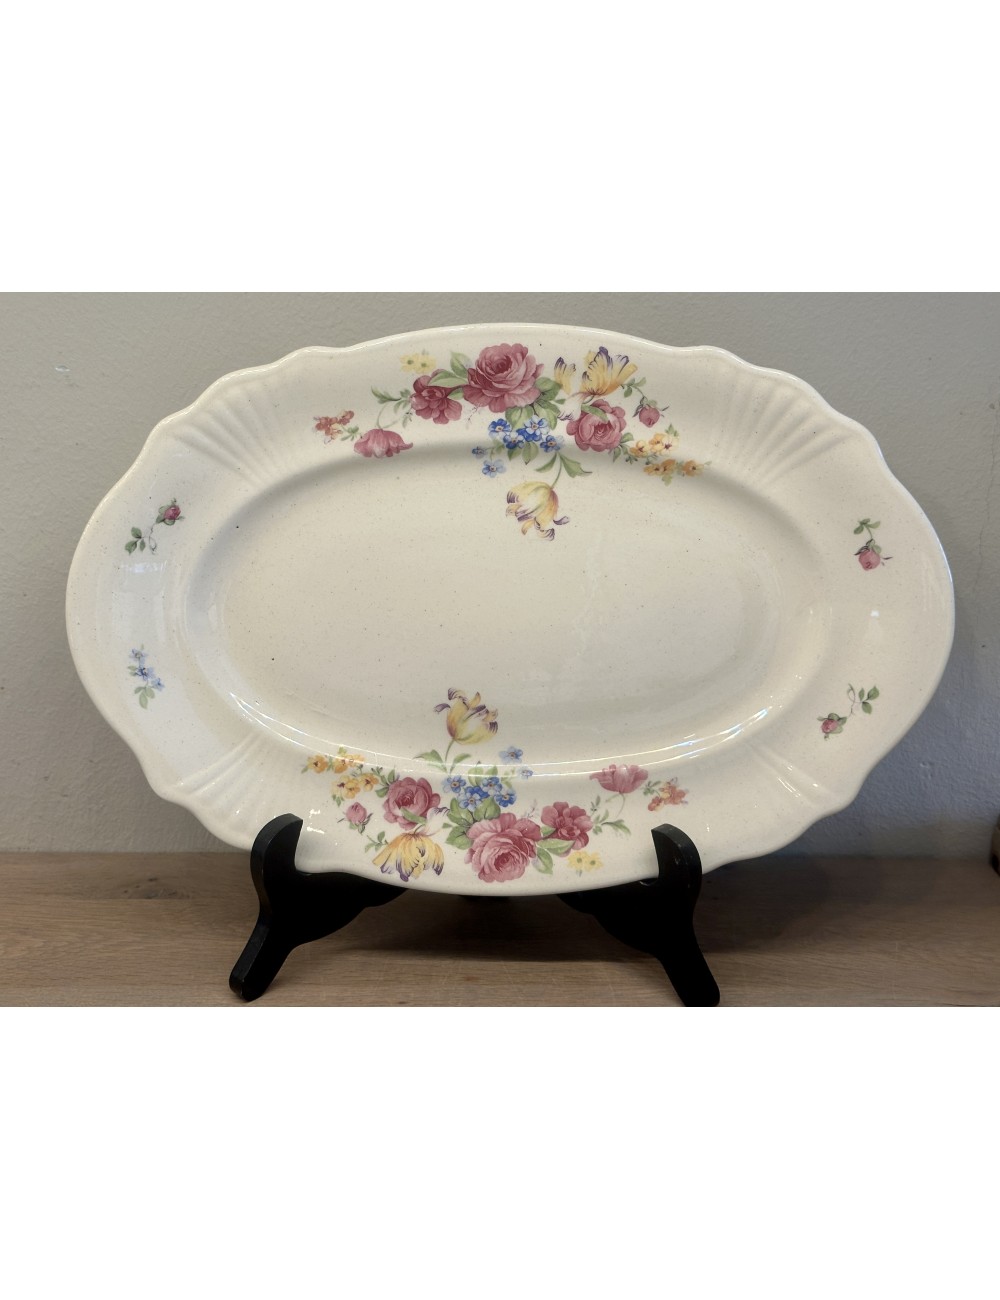 Plate - oval model - H Keramik (Germany) - décor of roses and flowers with a worked edge